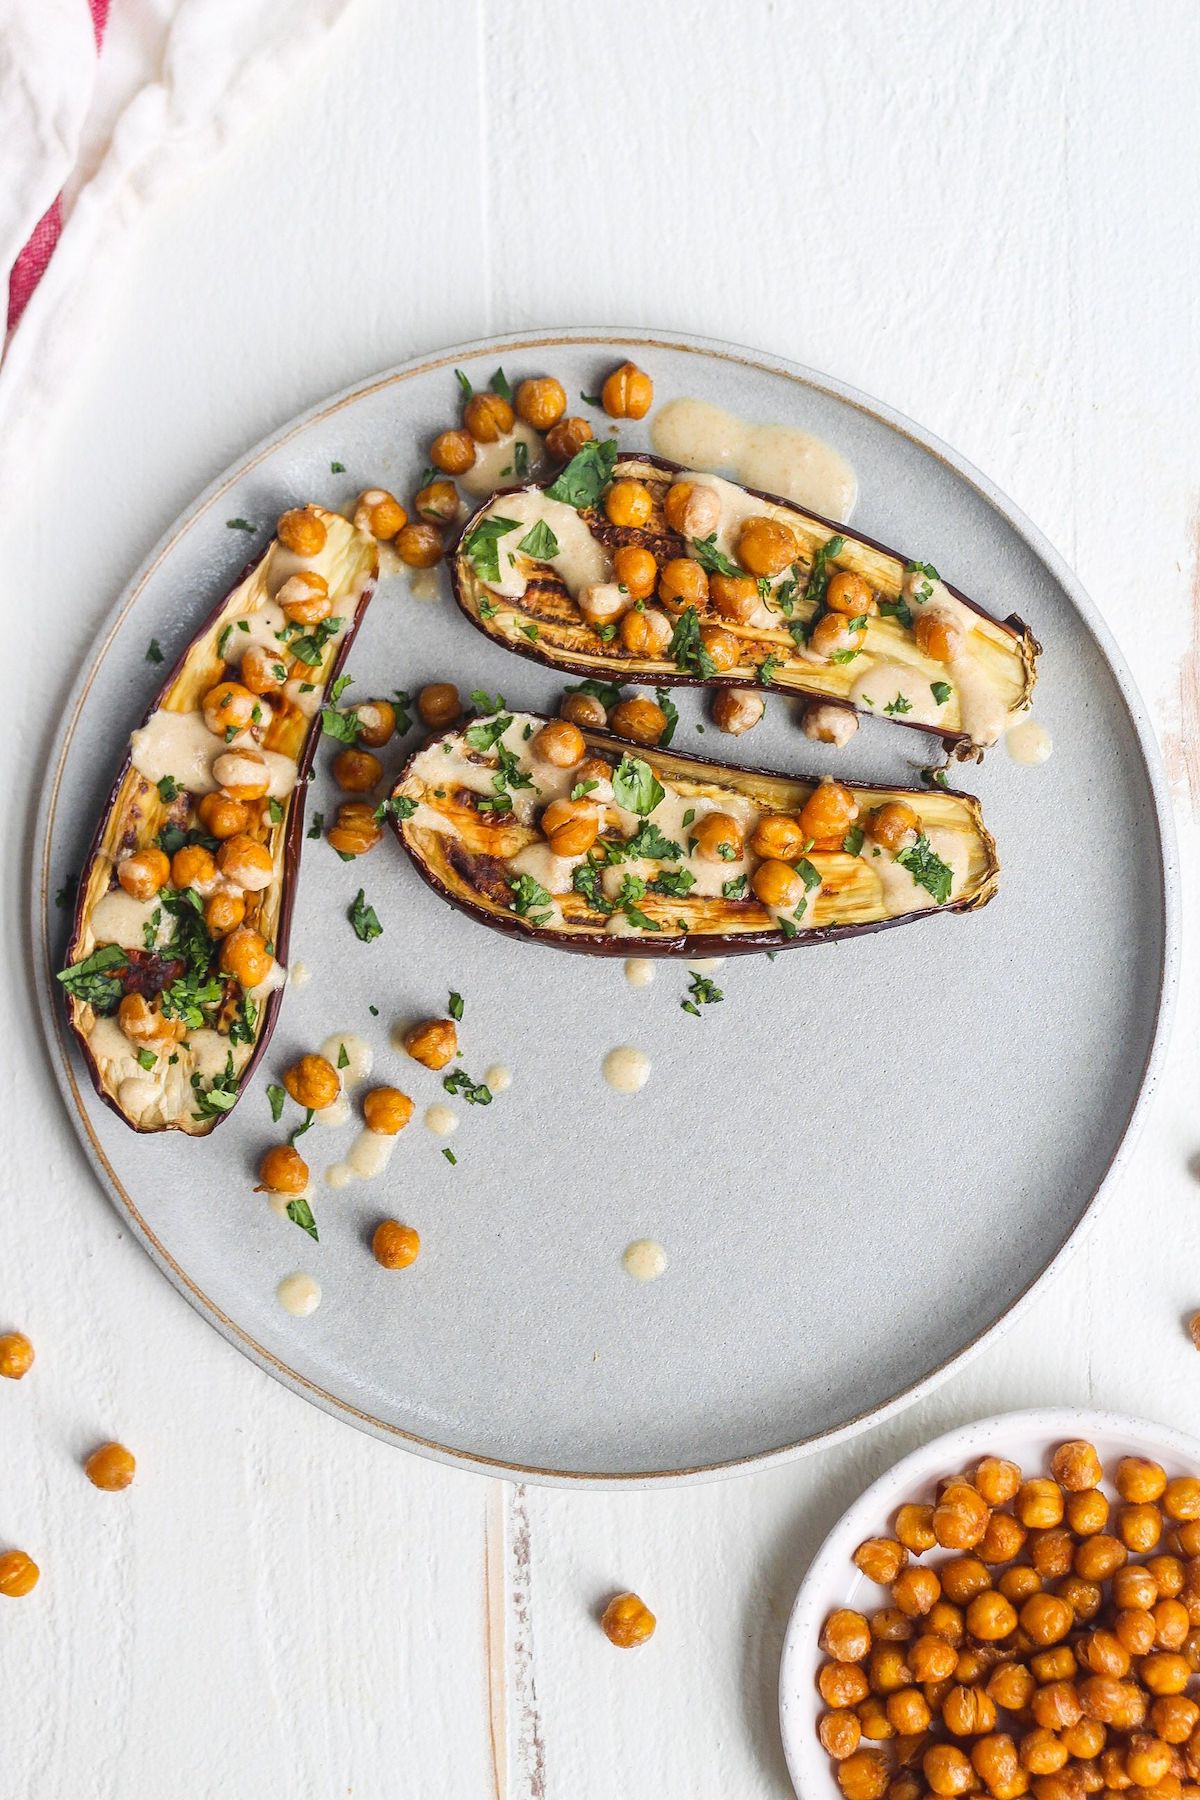 10 Mediterranean Diet Approved Recipes to Add to Your Meal Plan - Eggplant & Crispy Chickpeas with Tahini